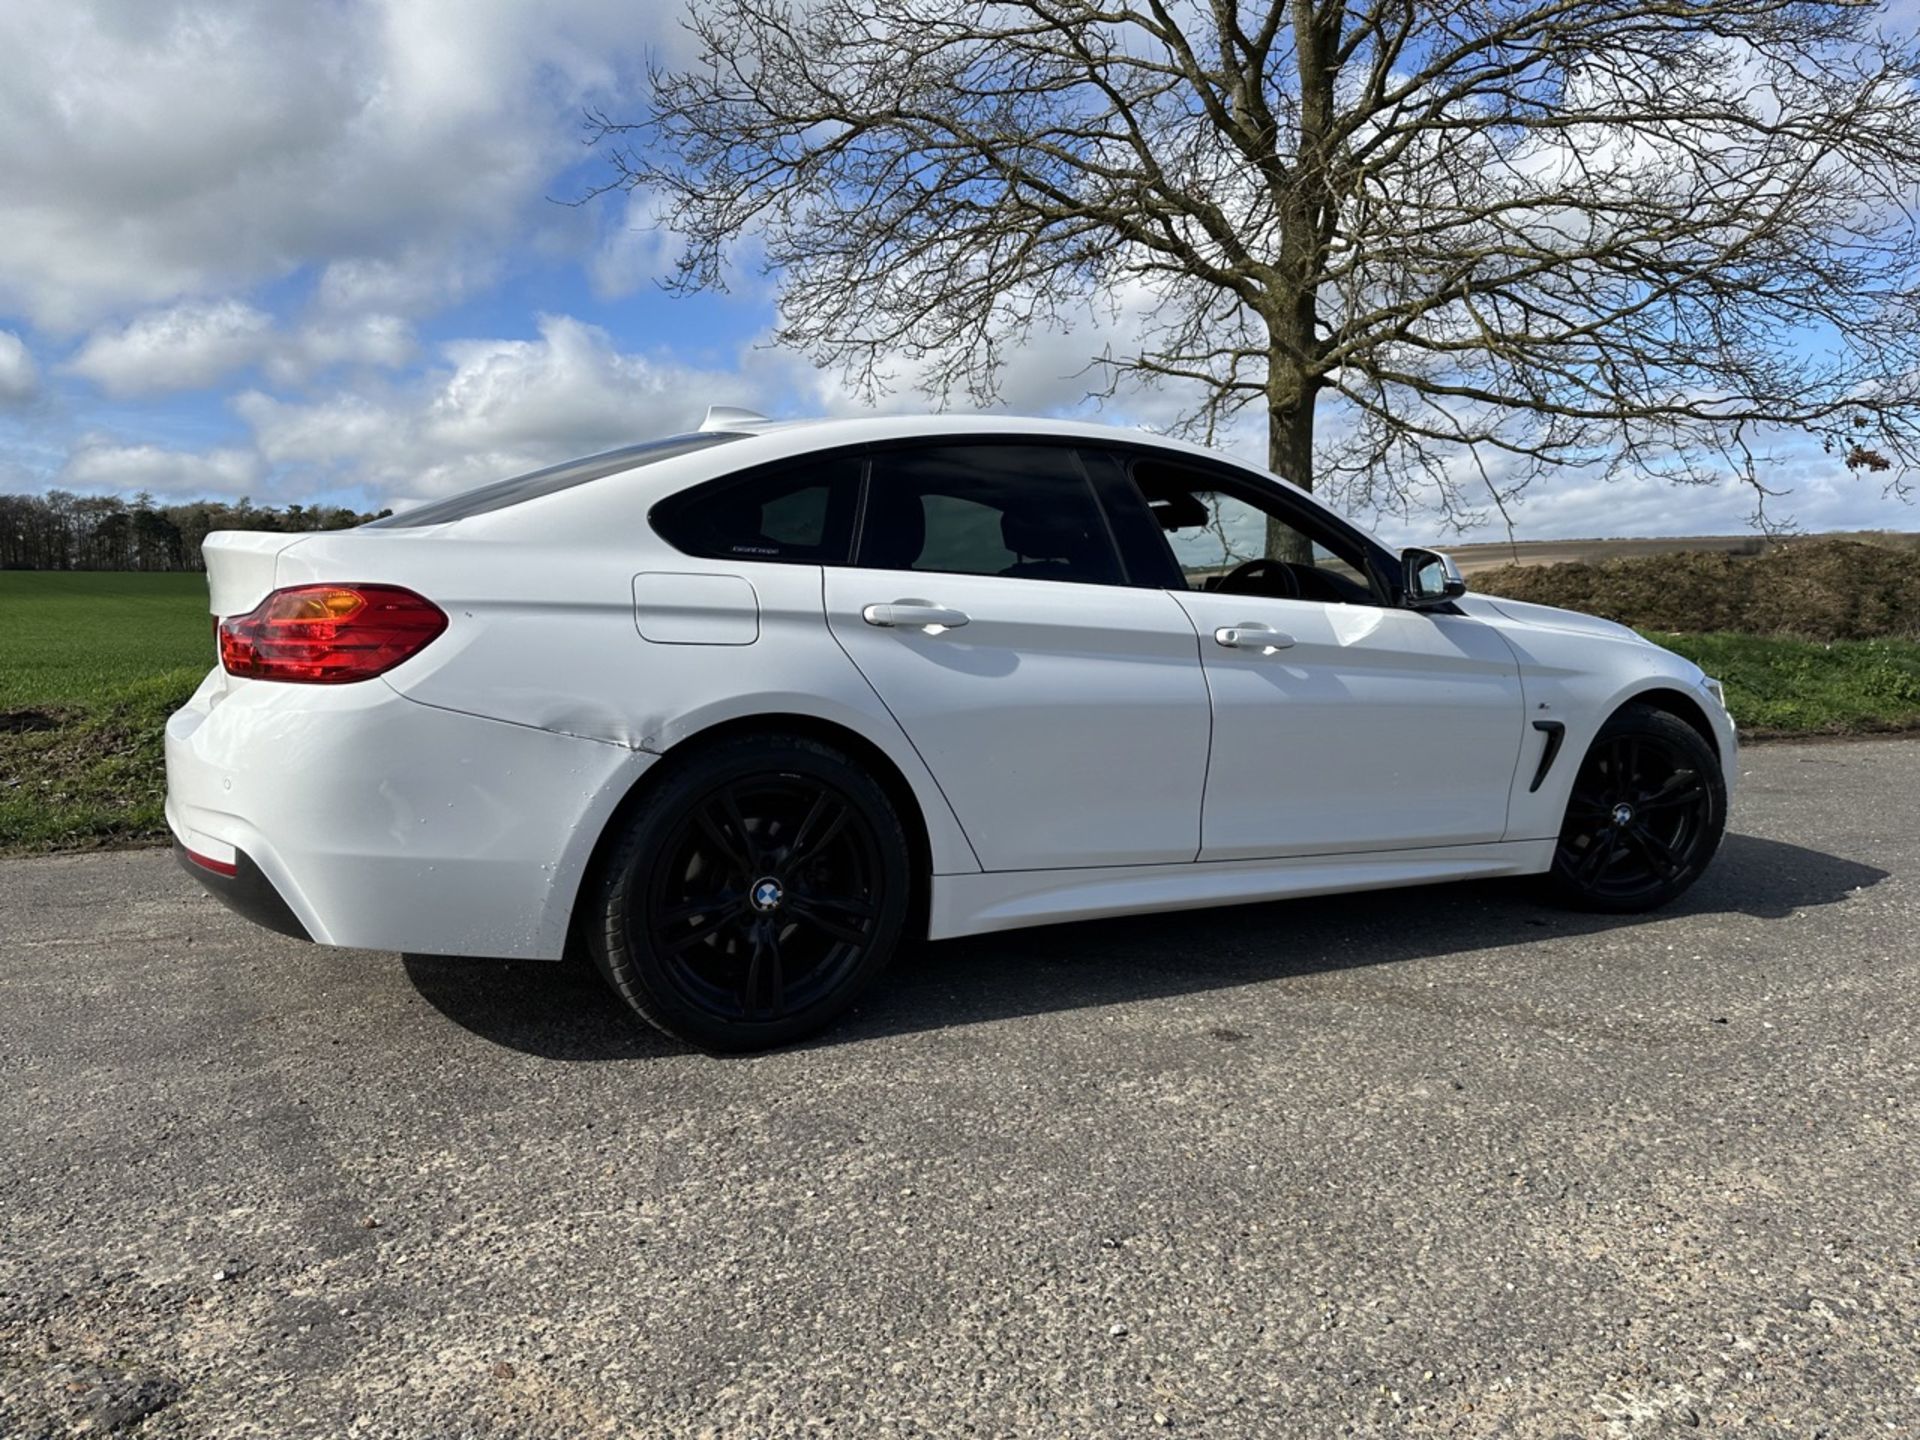 BMW 4 SERIES 420i M Sport 5dr [Professional Media] Manual - Petrol - 2.0 - Coupe- 54k miles - 2016 - Image 3 of 13